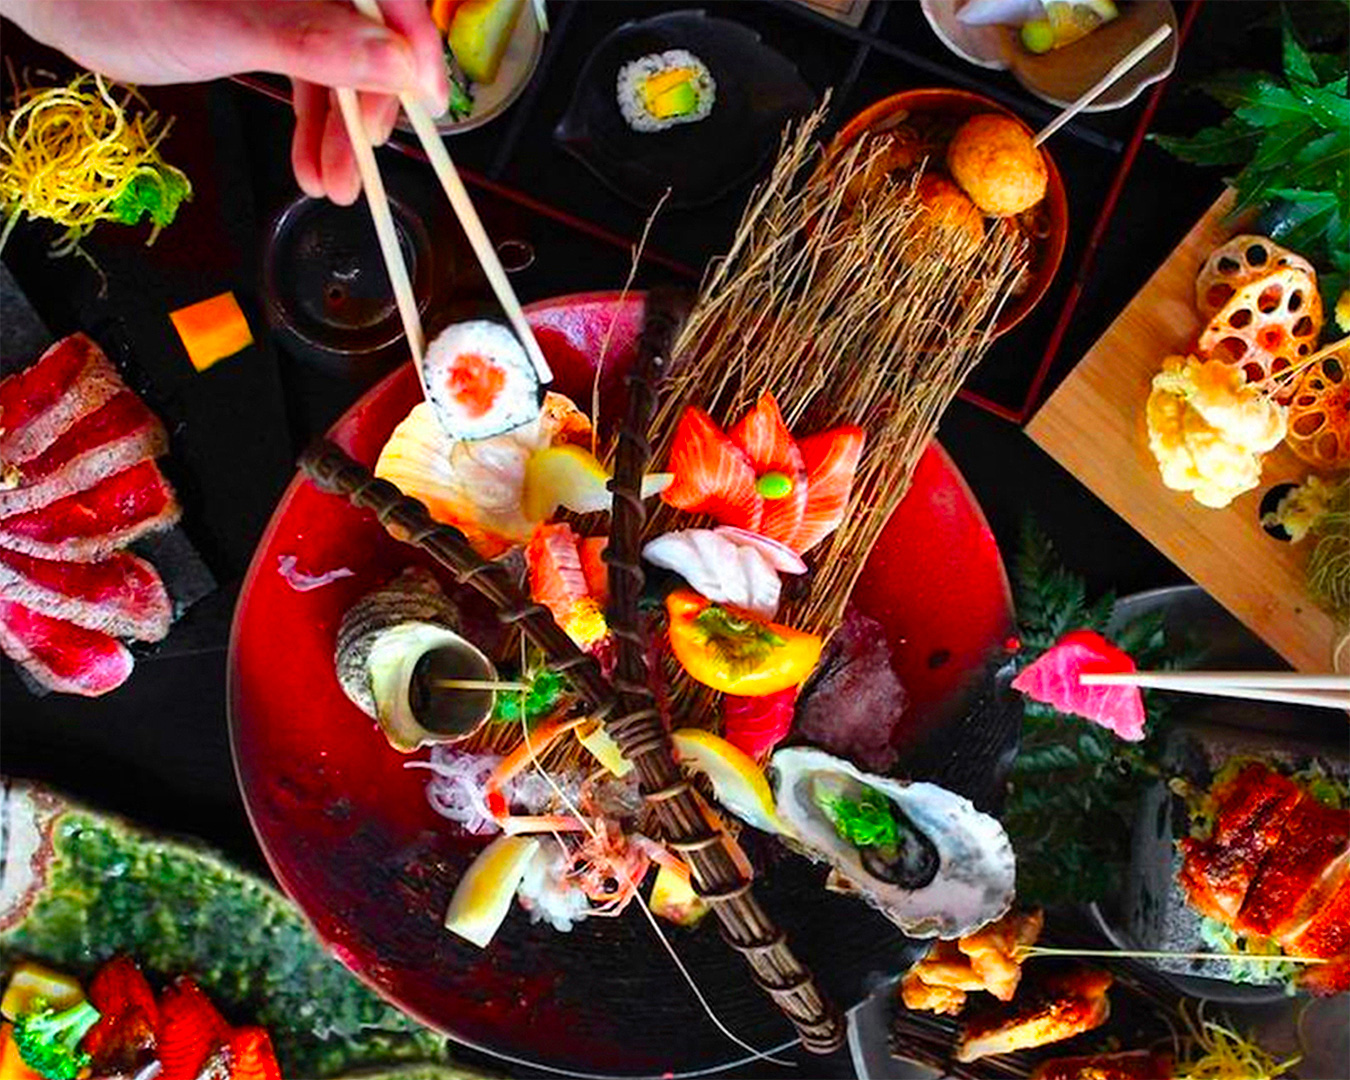 People dig into a wonderful looking spread at Japanese Bistro Zen.